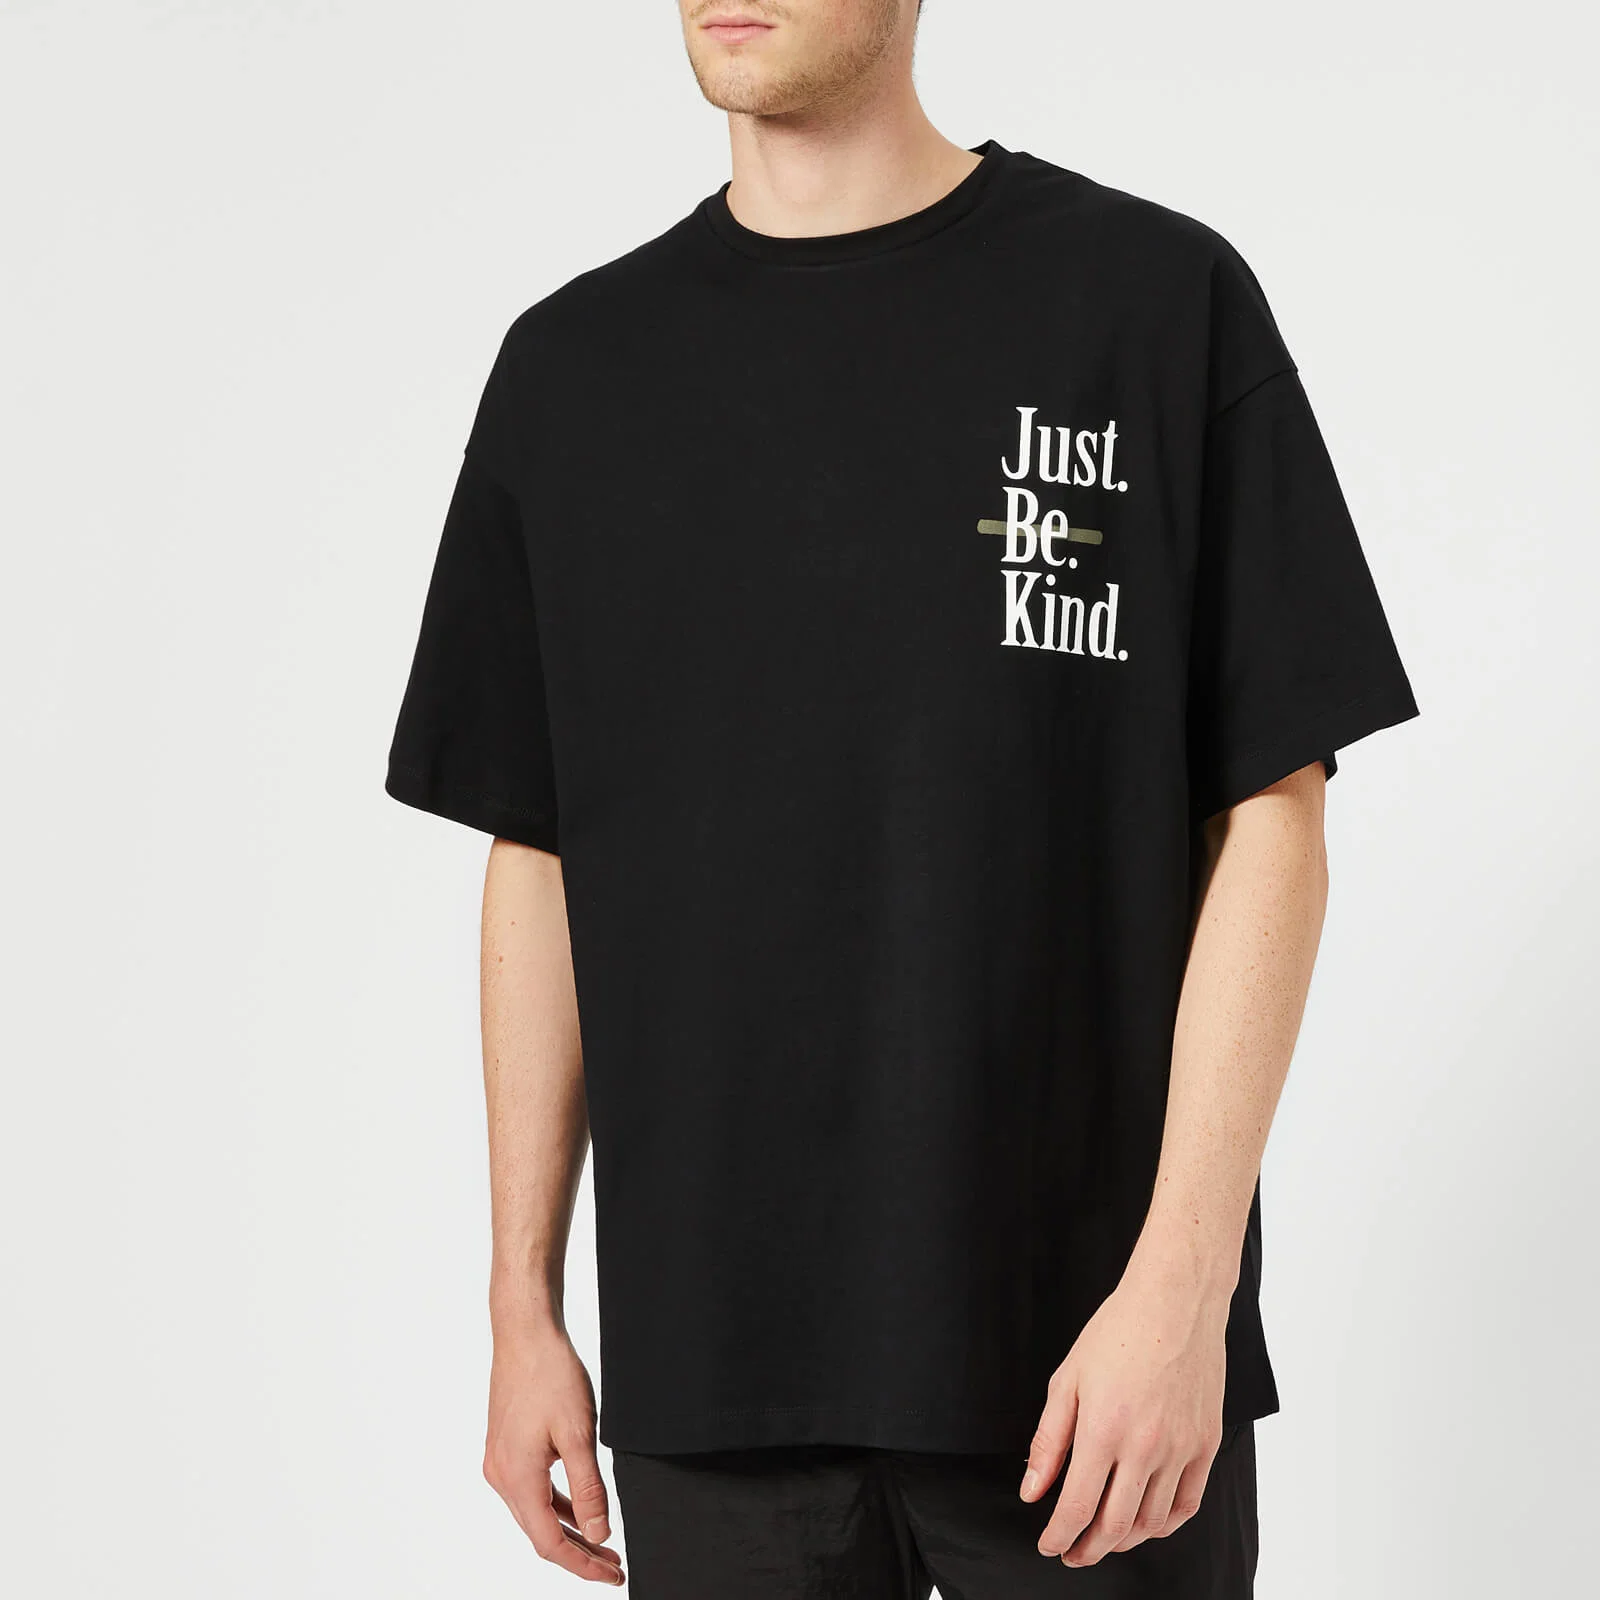 Wooyoungmi Men's Just Be Kind T-Shirt - Black Image 1